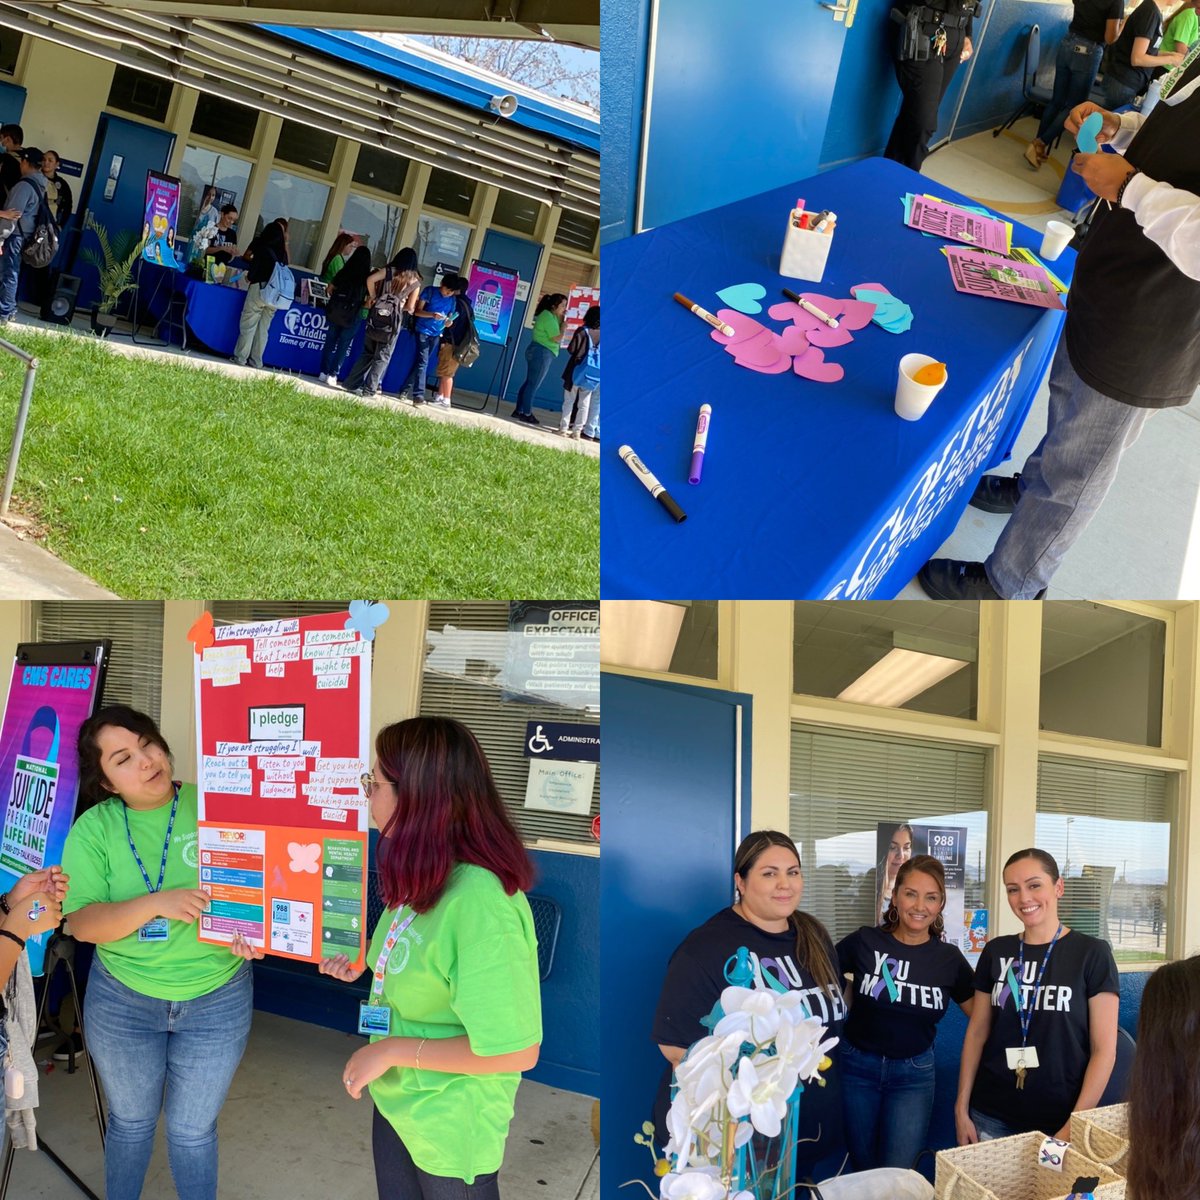 Our CMS counselors Wellness Wednesday lunch activity for Suicide Prevention Week!  Big thanks to our @cjusd_mh cjusd_mh interns for providing resources to our students! #youmatter #cjusdcares @coltonjusd #coltonmiddlefalcons @cjusdstudentsvc @coltonmiddle_counseling